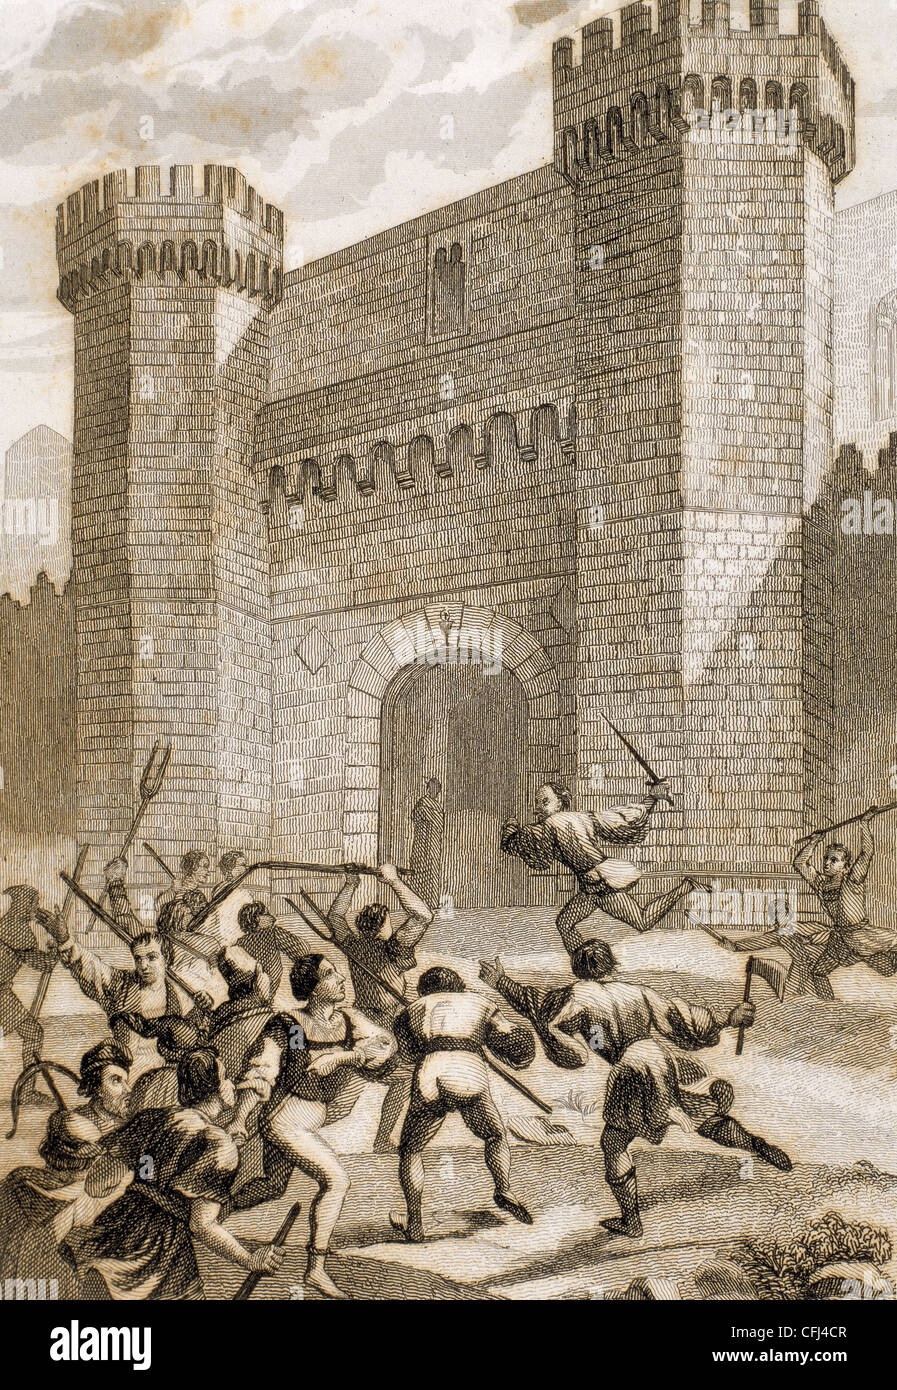 Revolt of peasants in front of the Monastery of Poblet. Catalonia. Spain. Engraving. Stock Photo